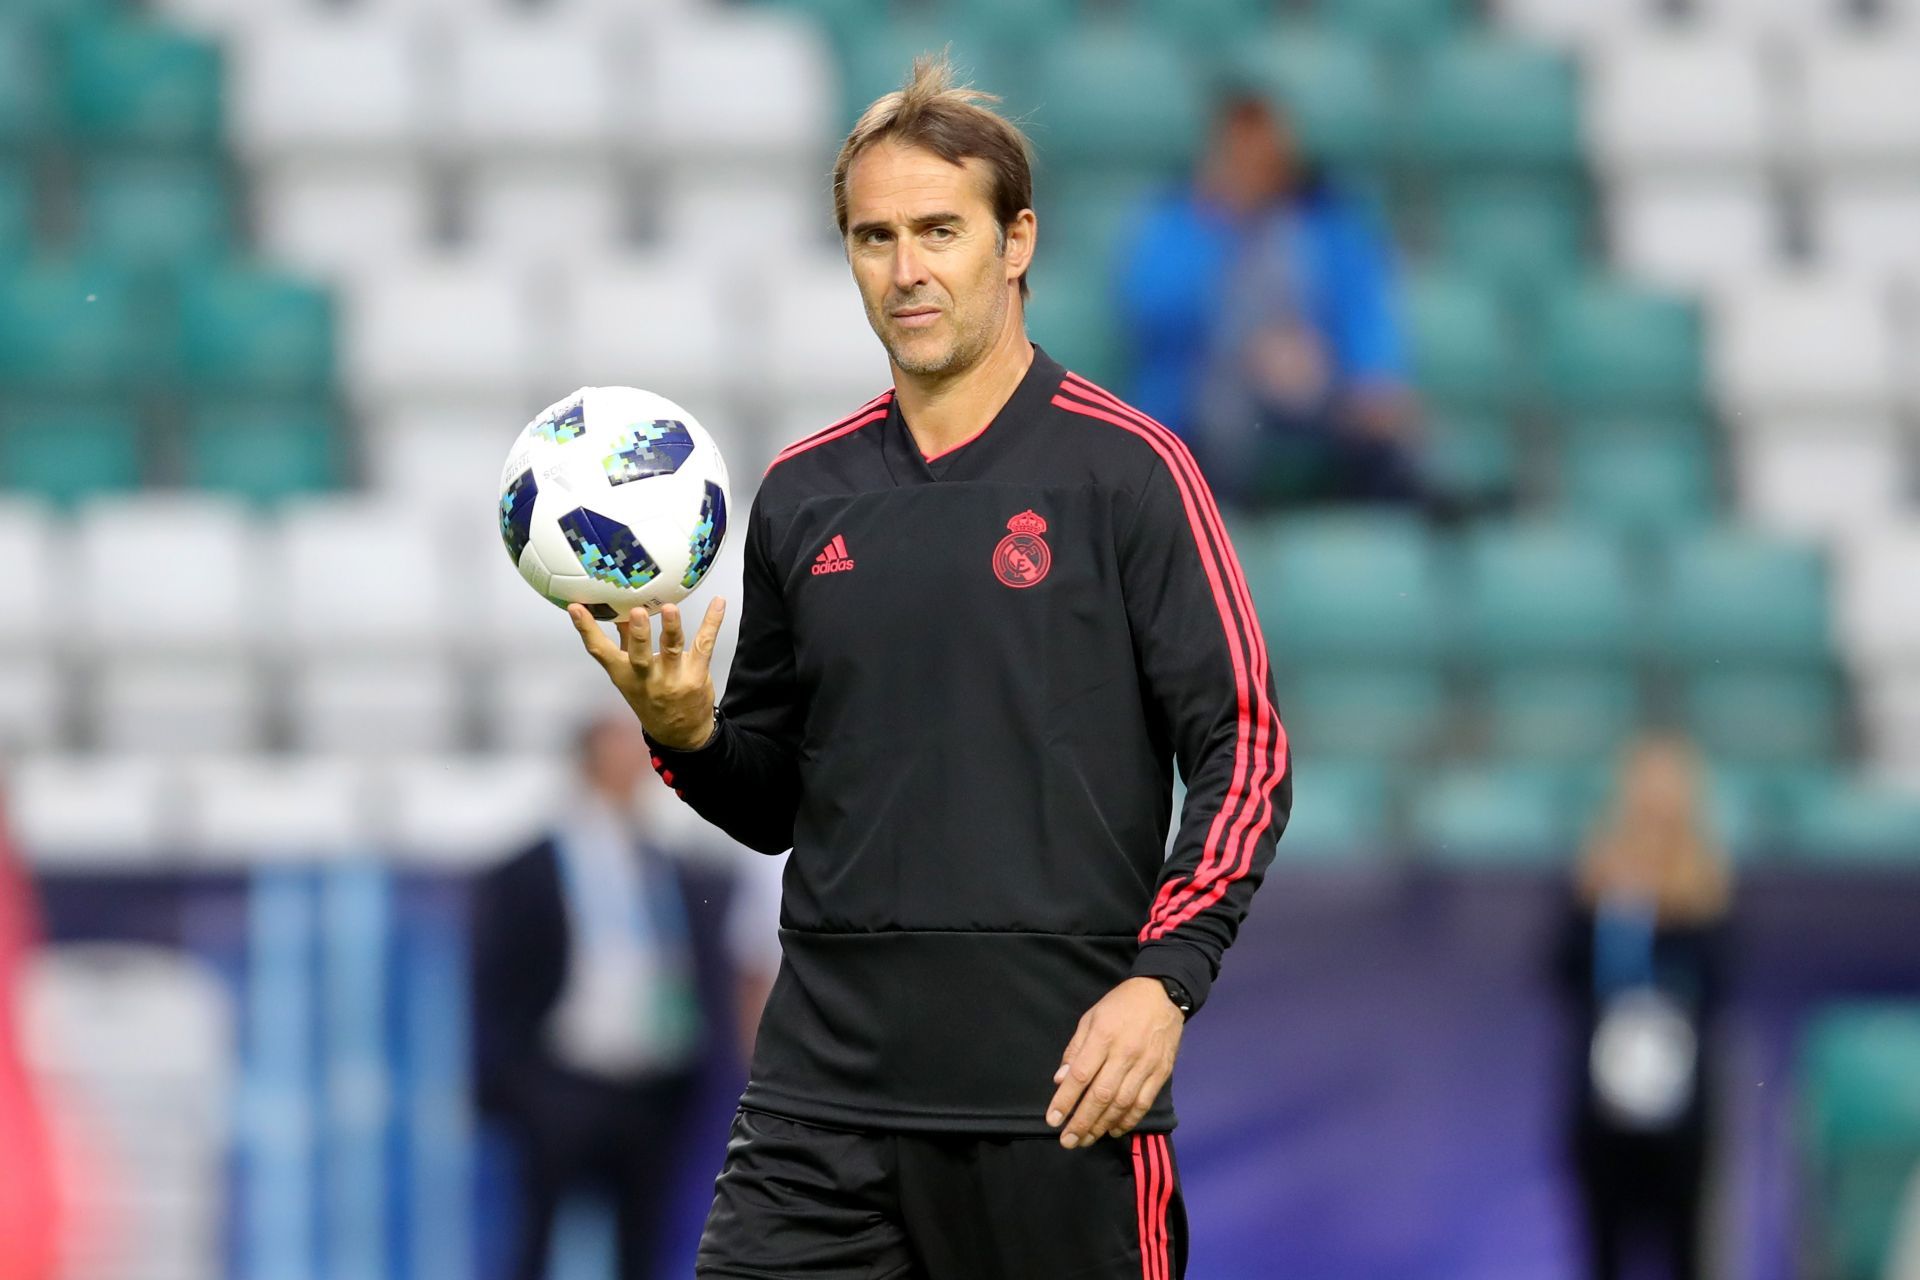 Julen Lopetegui only lasted a brief time at Real Madrid